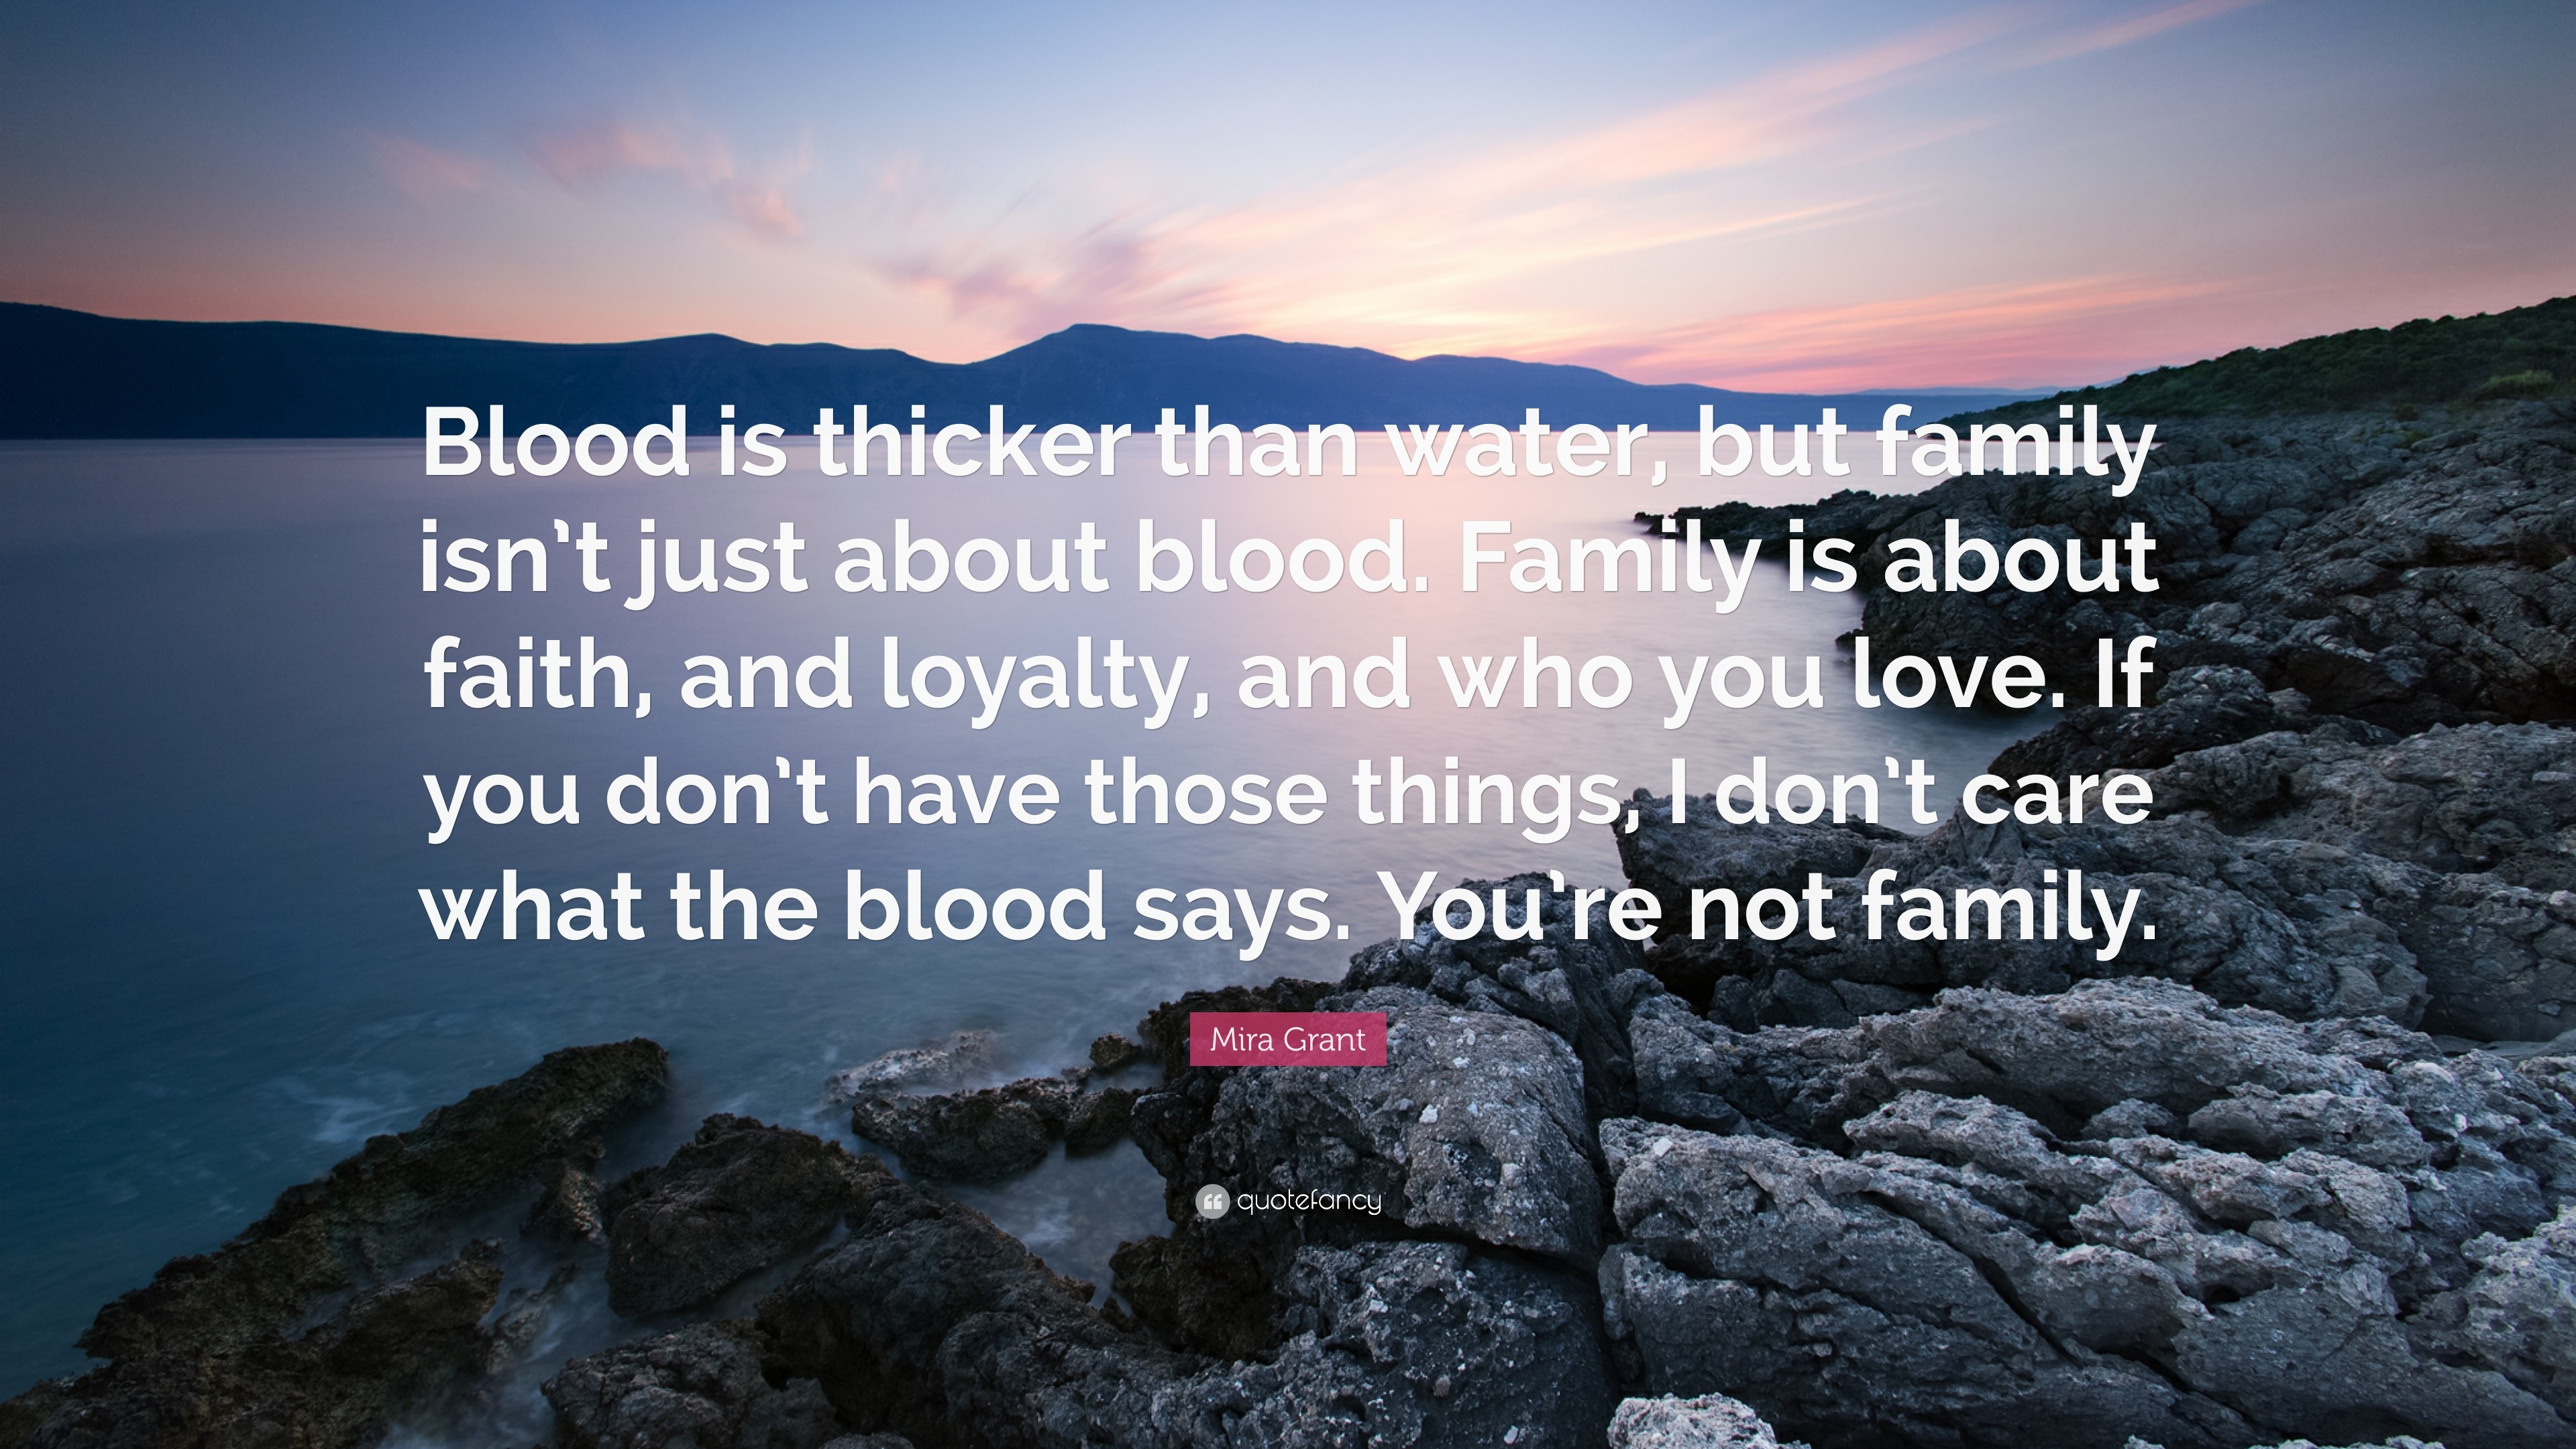 Mira Grant Quote: “Blood is thicker than water, but family isn’t just